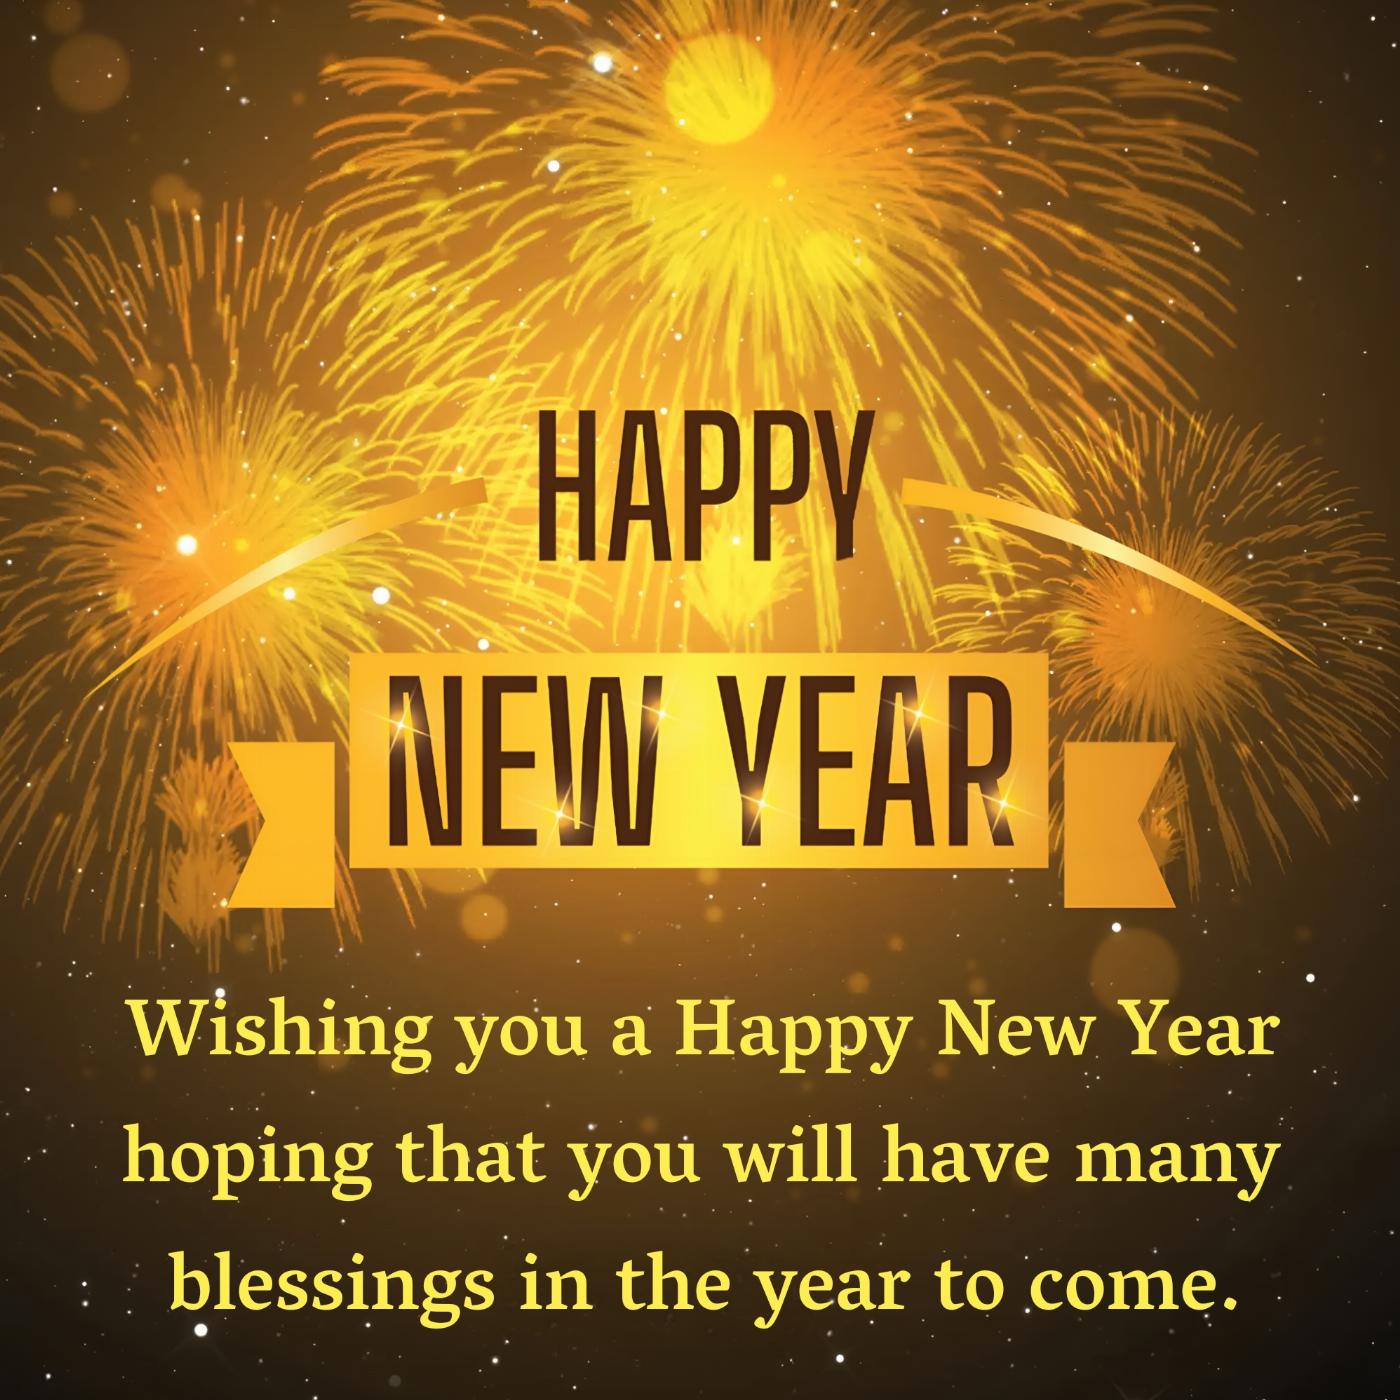 Wishing you a Happy New Year hoping that you will have